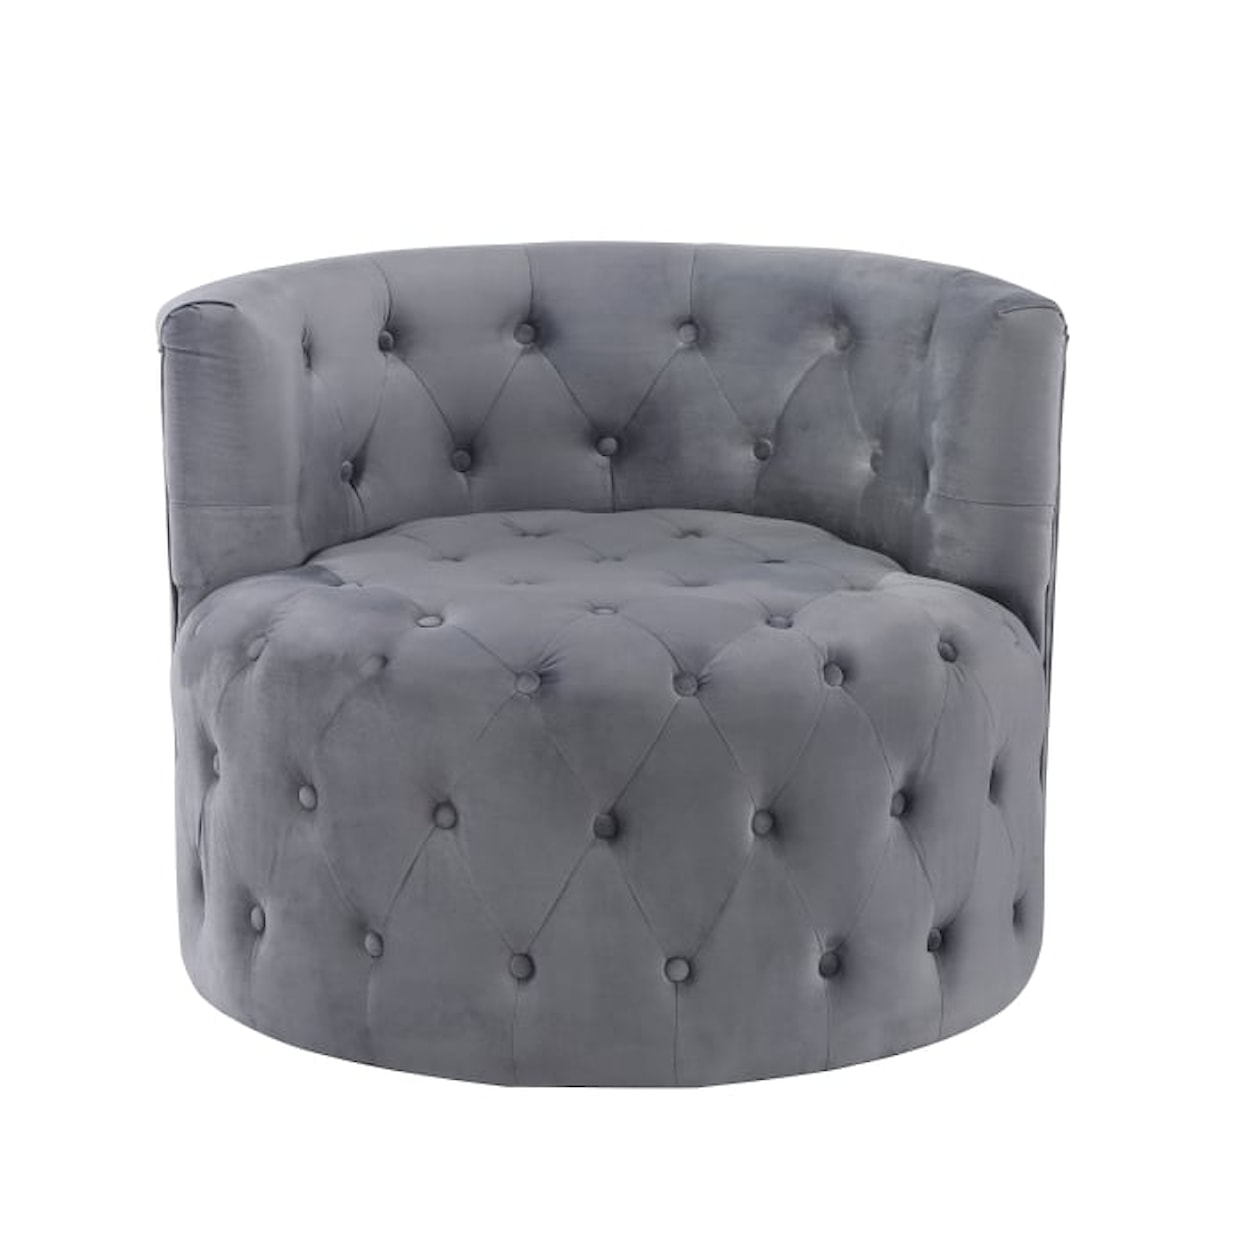 Homelegance Furniture Cheswold Swivel Chair